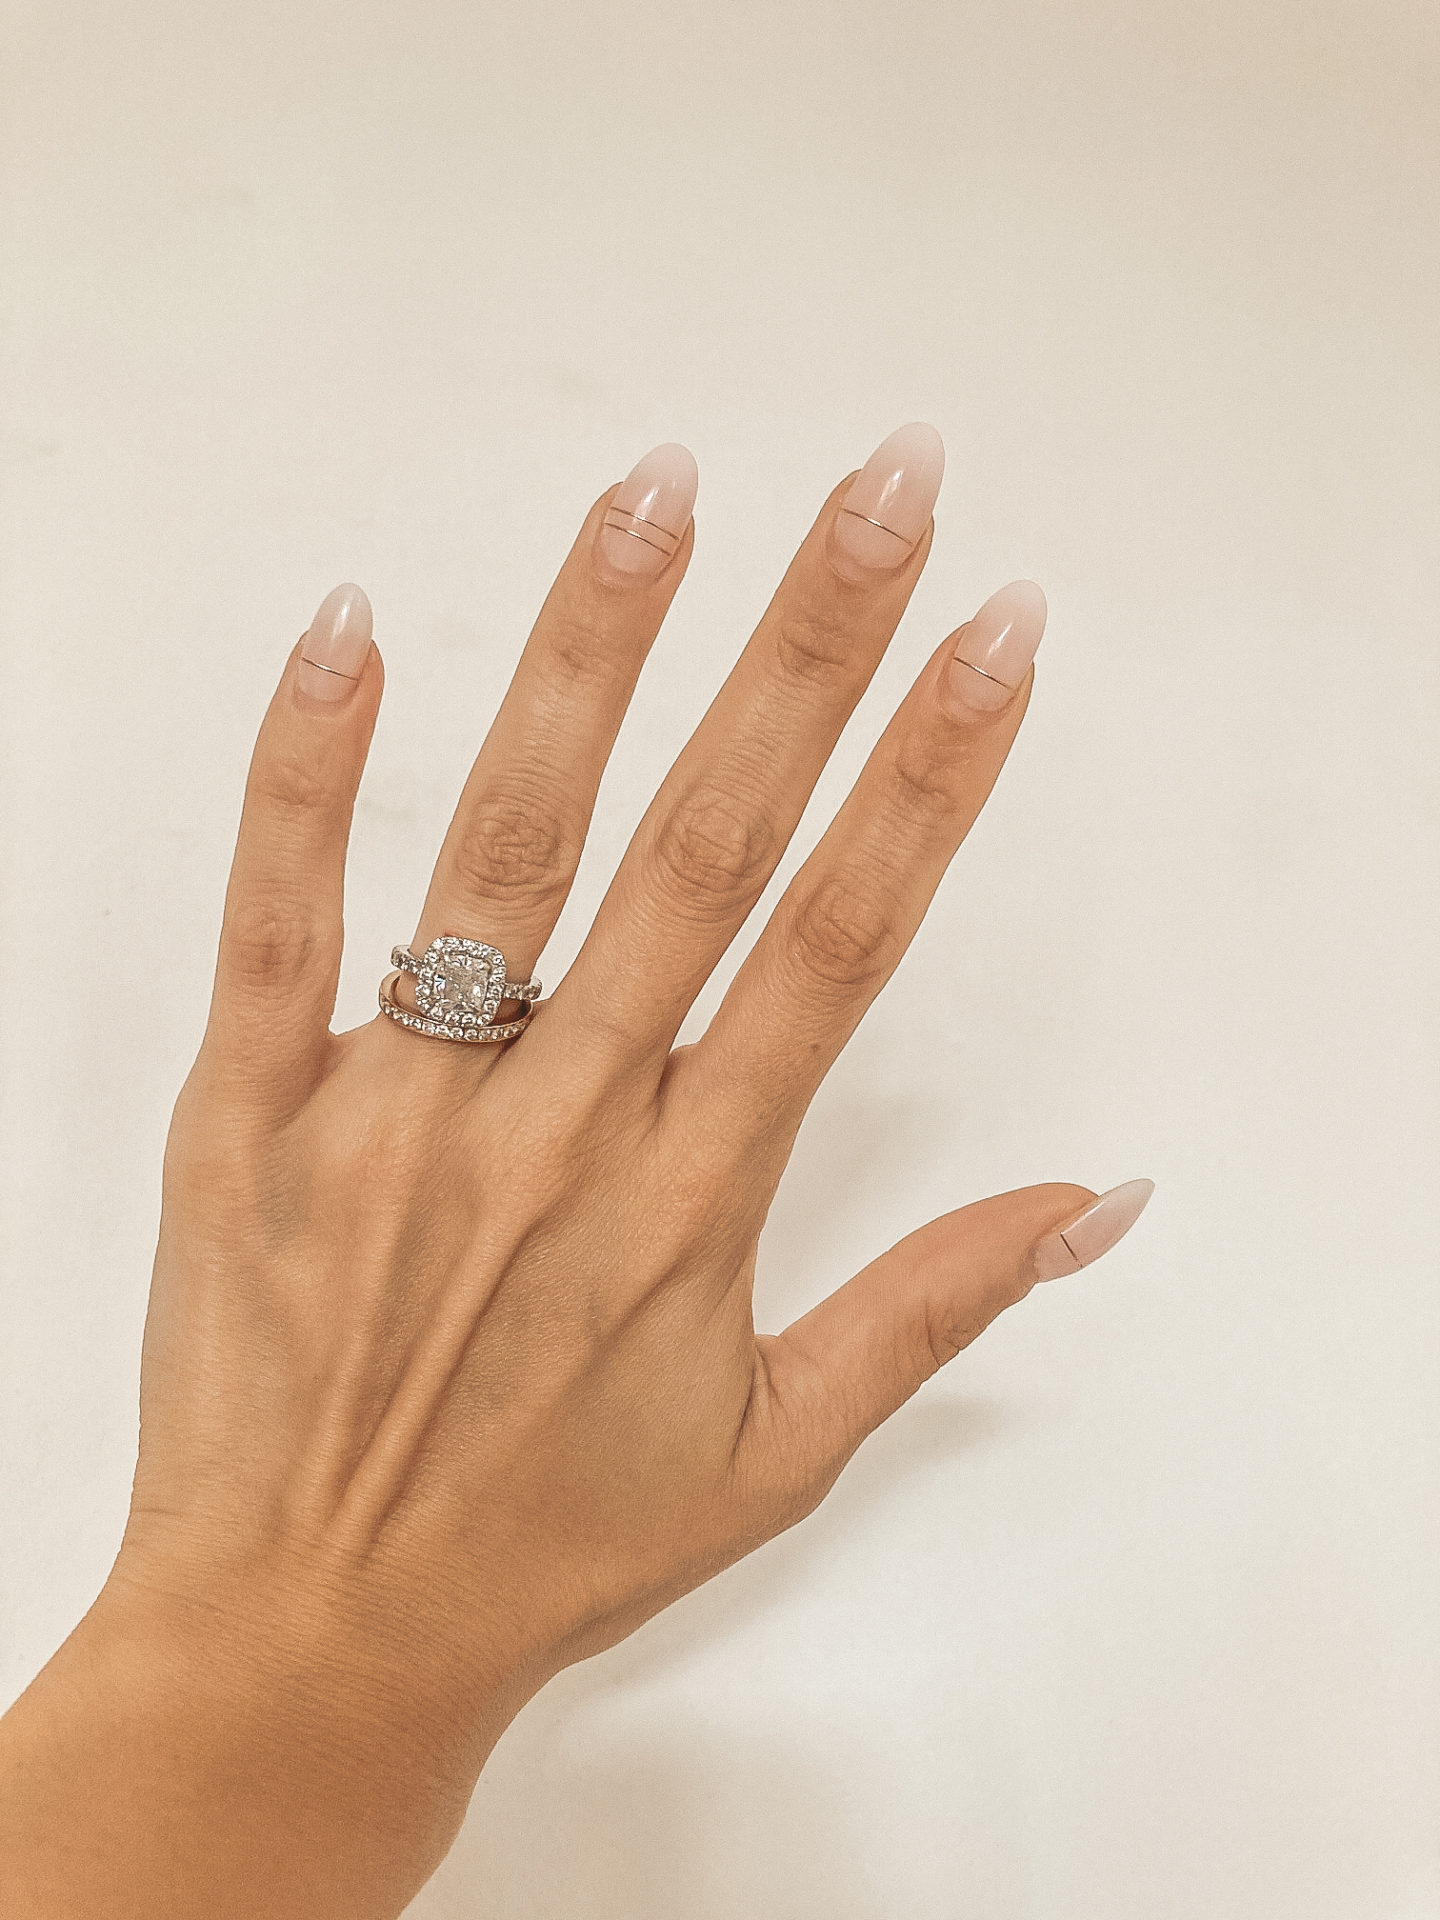 Hand with a white French ombre manicure - a manicure that matches every outfit